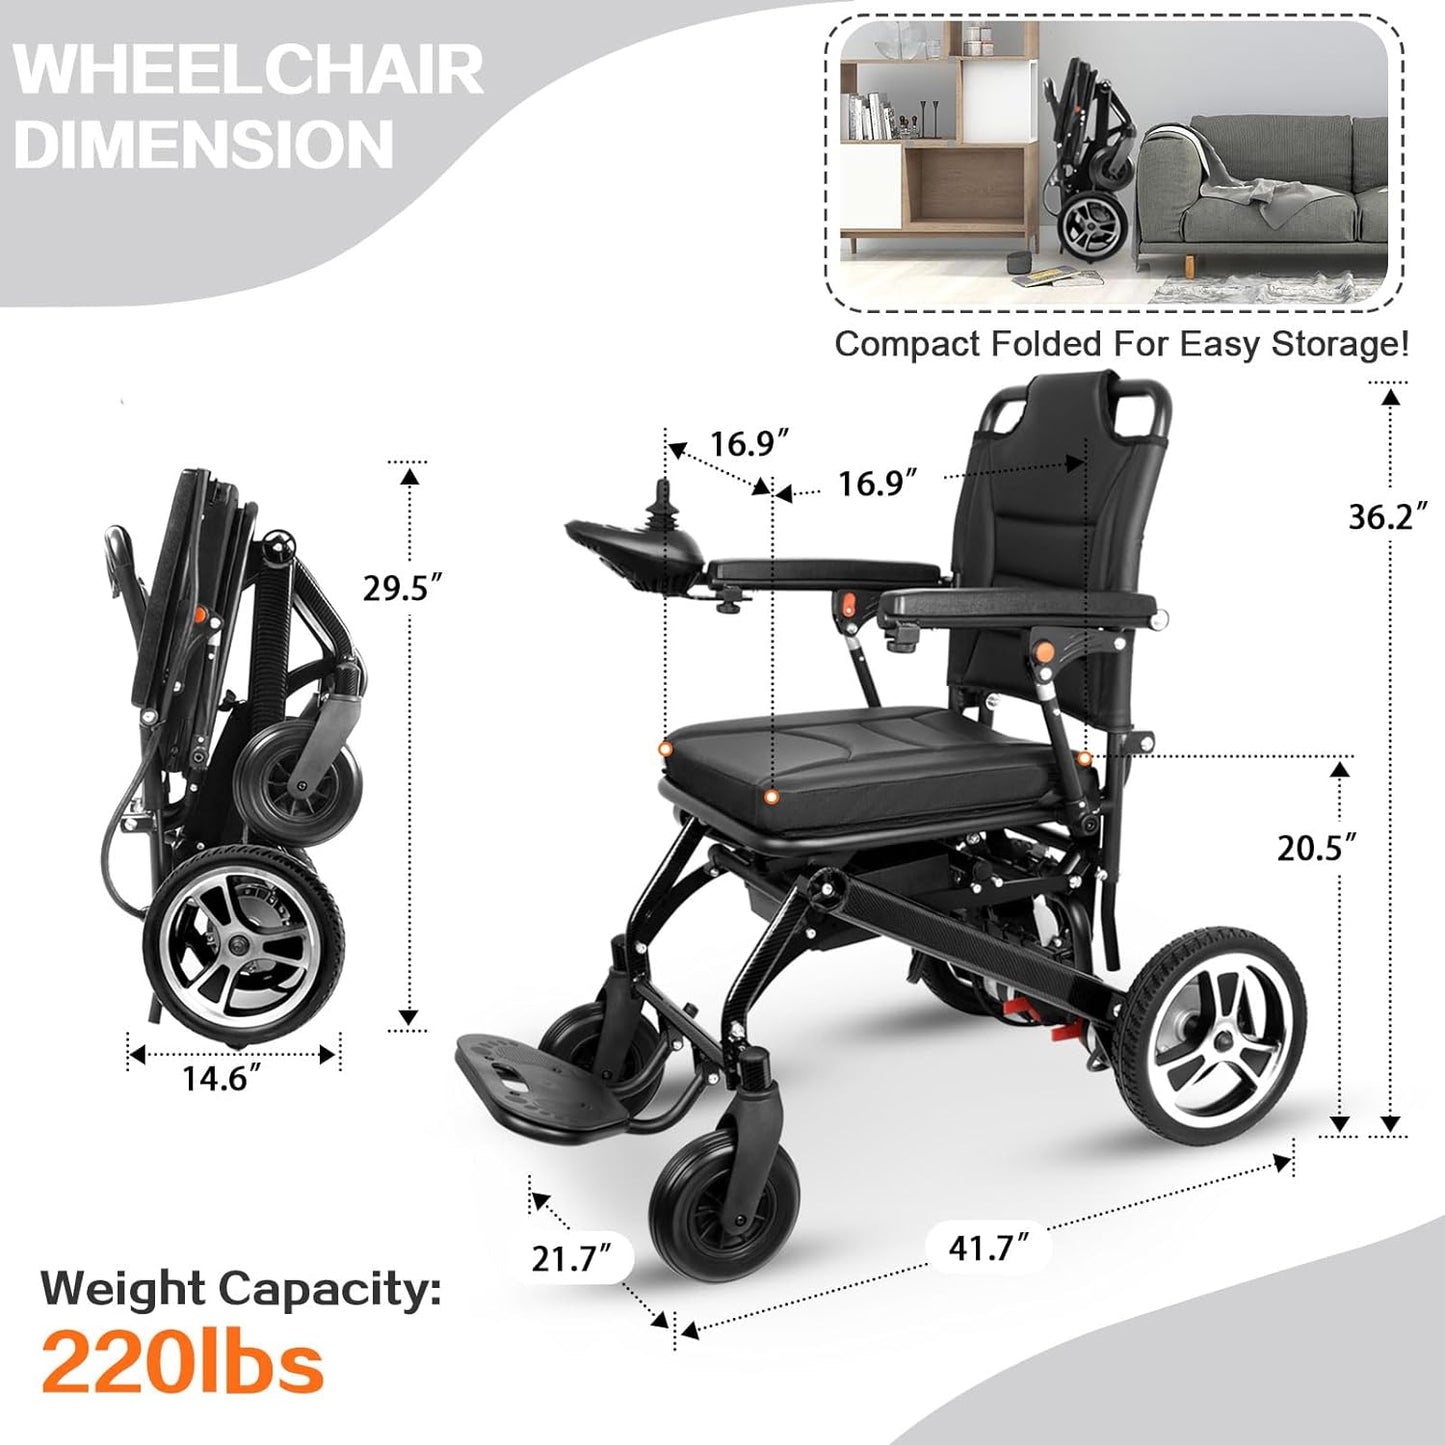 WISGING Weights Only 37LBS, Folding Electric Powered Wheelchair Lightweight Portable Smart Chair Personal Mobility Scooter Wheelchair, Travel Wheelchair for Senior, Supports 220LBS